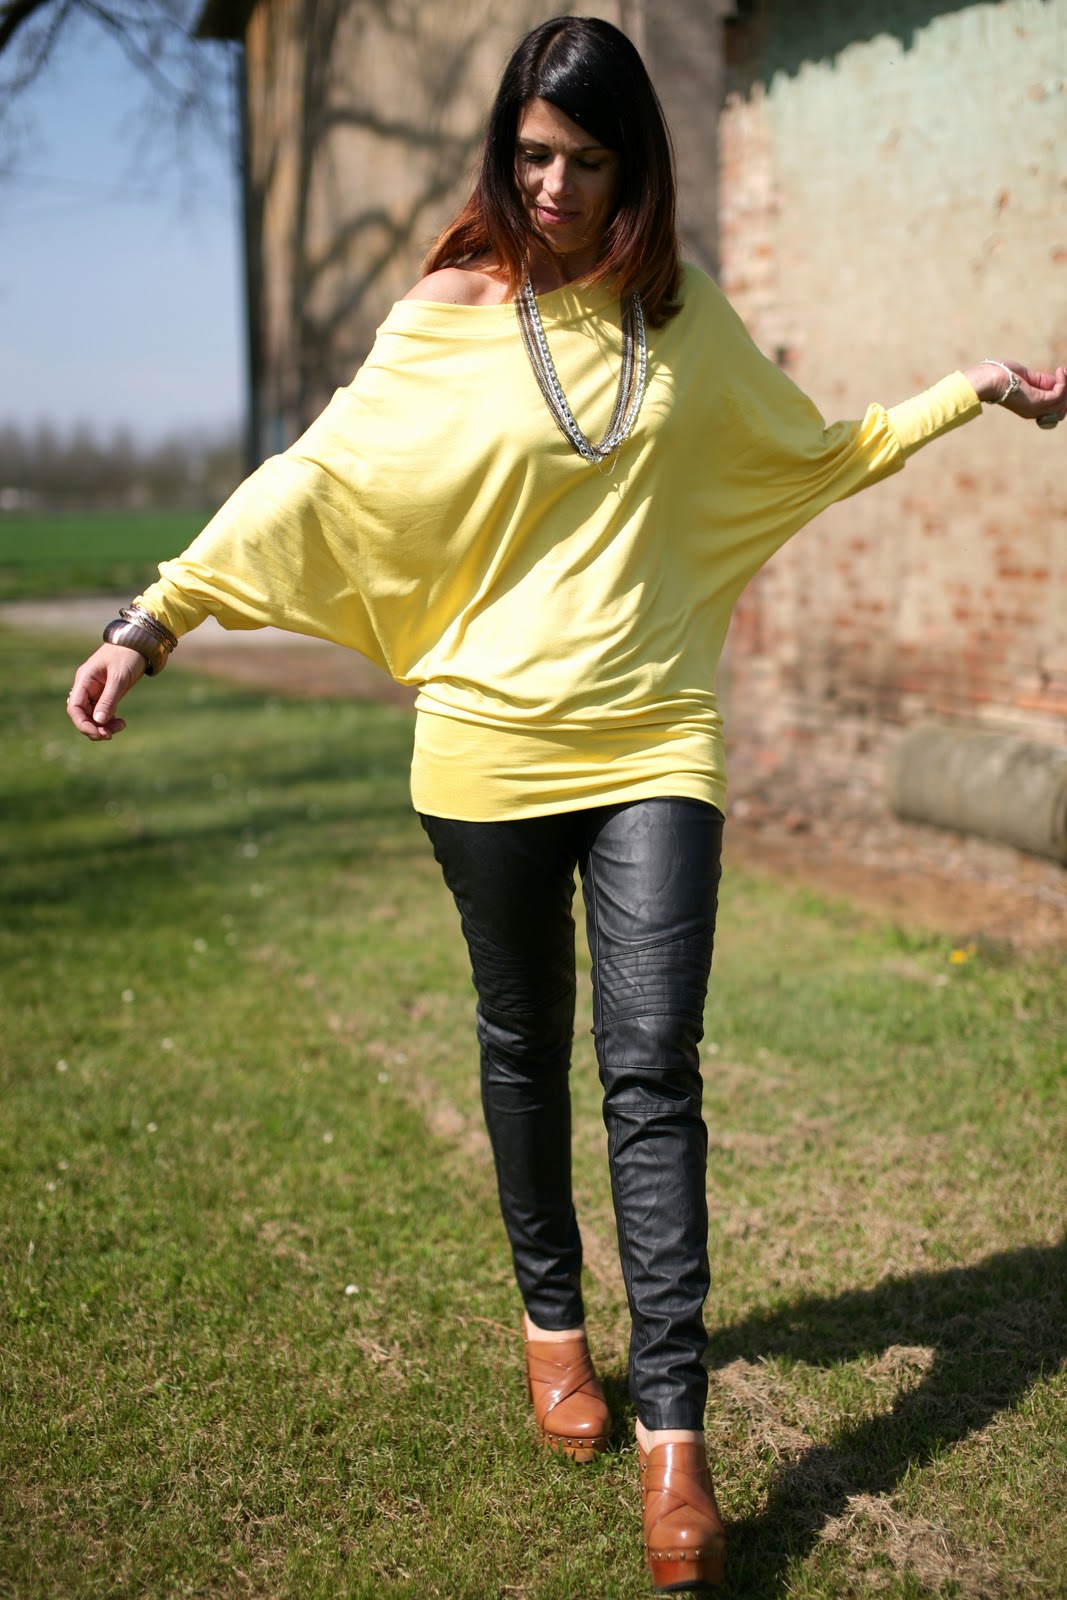 ChiccaStyle: Yellow Sunshine Top And Black Leather Pants